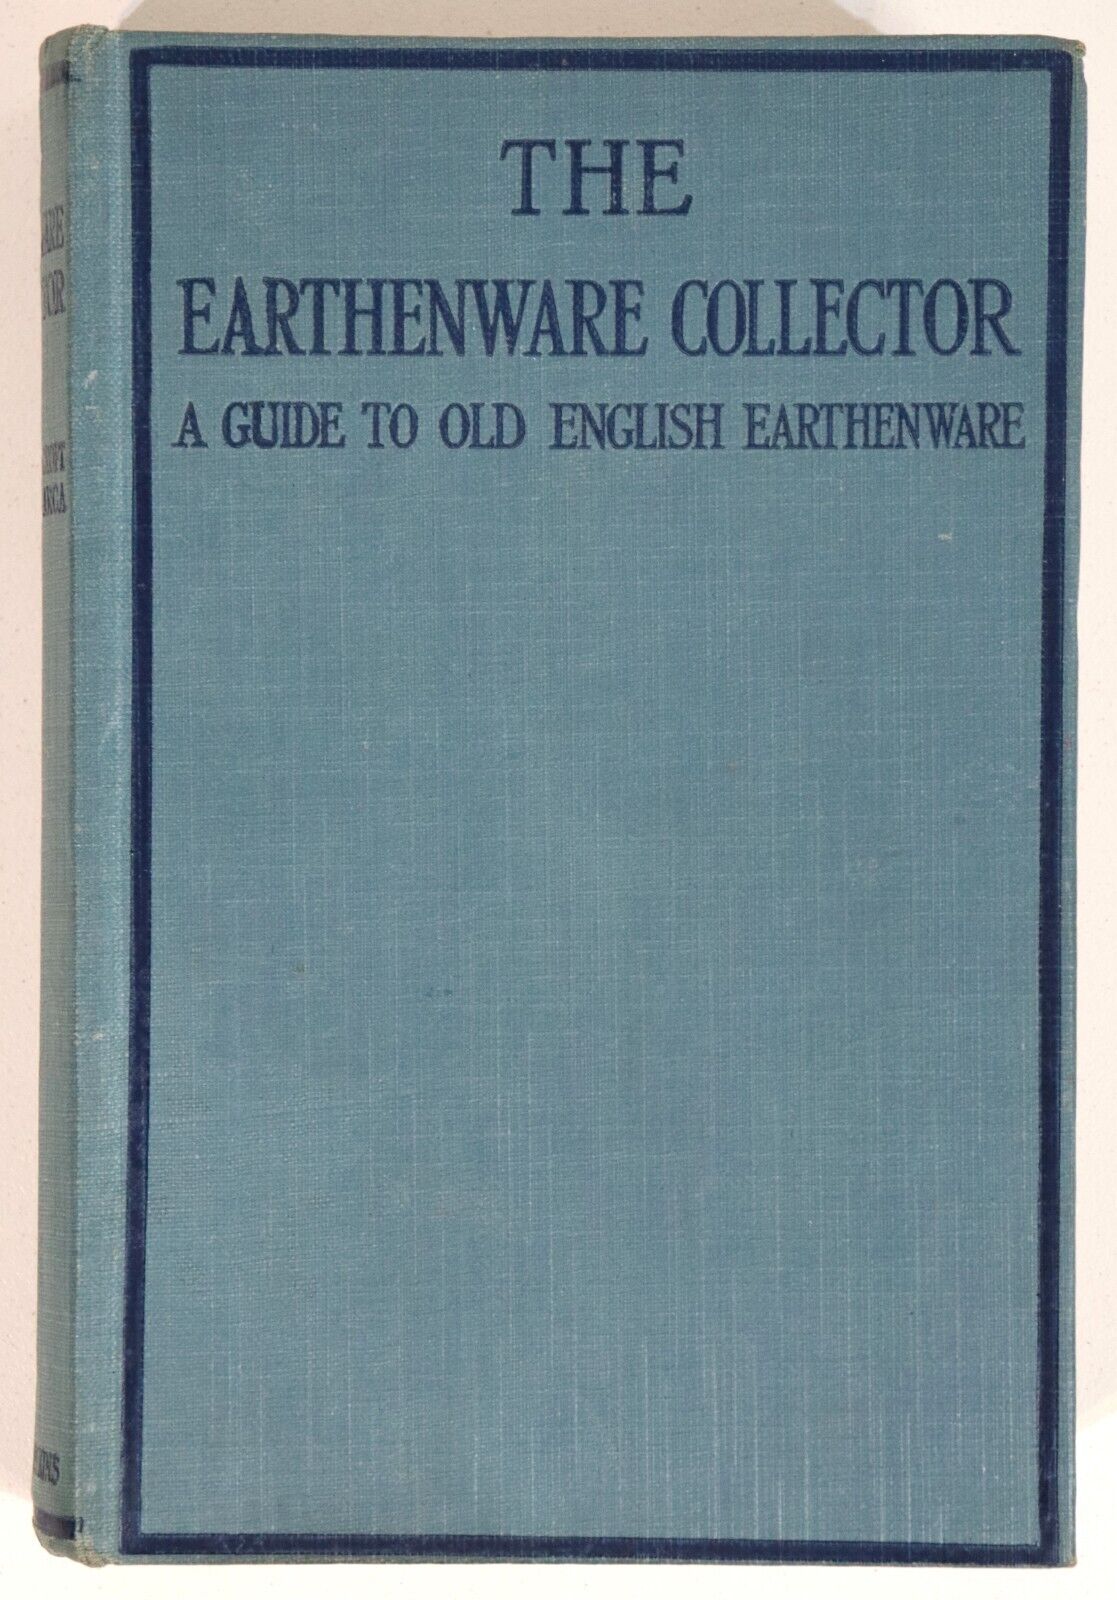 The Earthenware Collector - 1920 - Antique & Collectible Reference Book